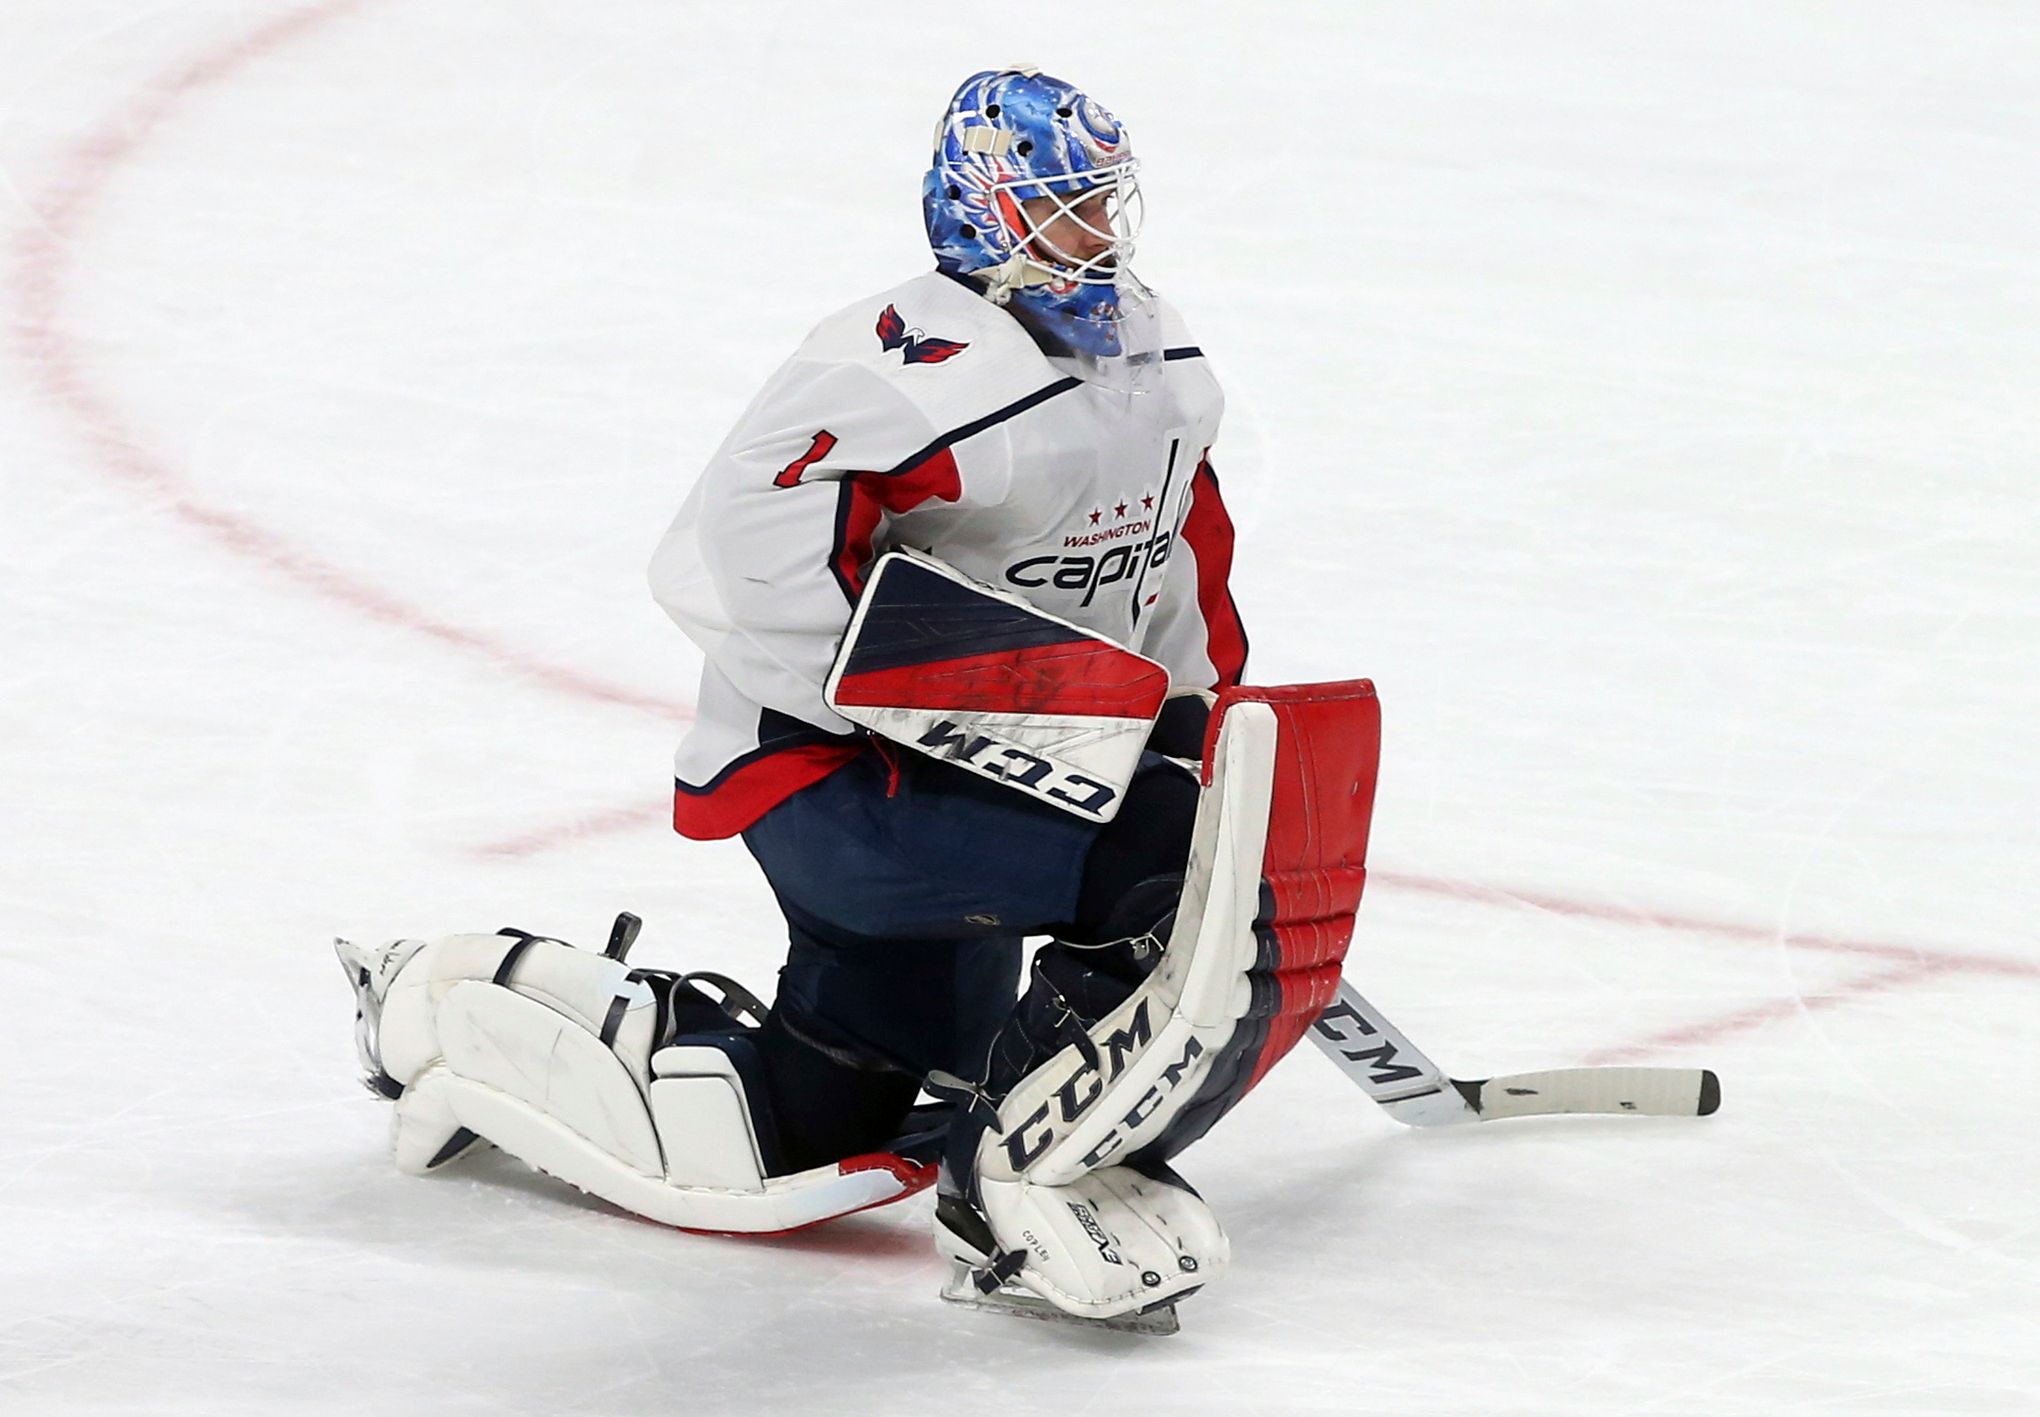 Capitals sign goalie Pheonix Copley to 3-year, $3.3 million extension